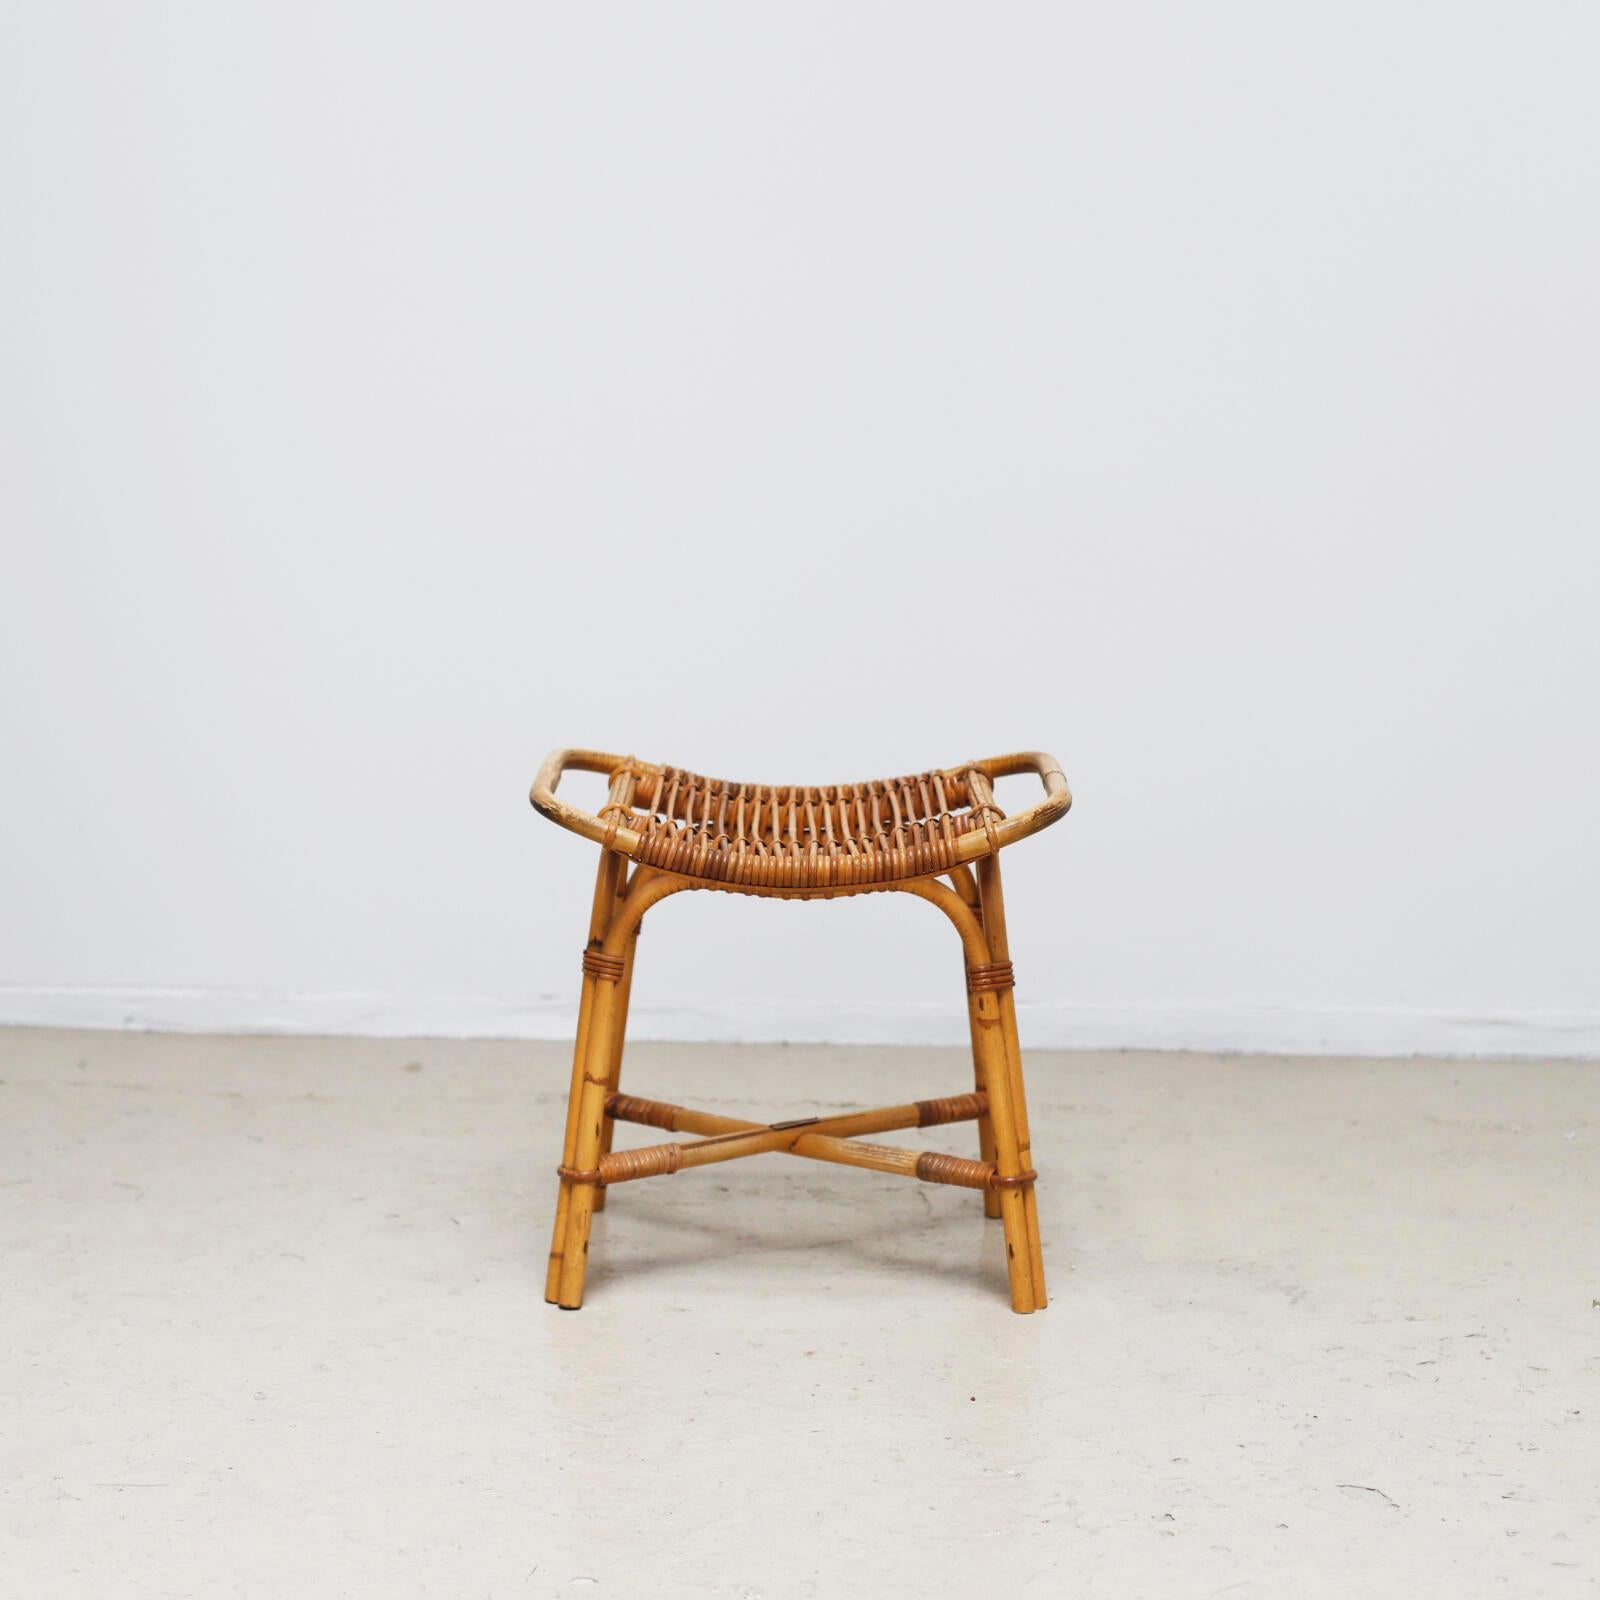 Rattan low stool designed by Adrien Audoux and Frida Minet in 1950s.
Original metal plate on the rung.
      